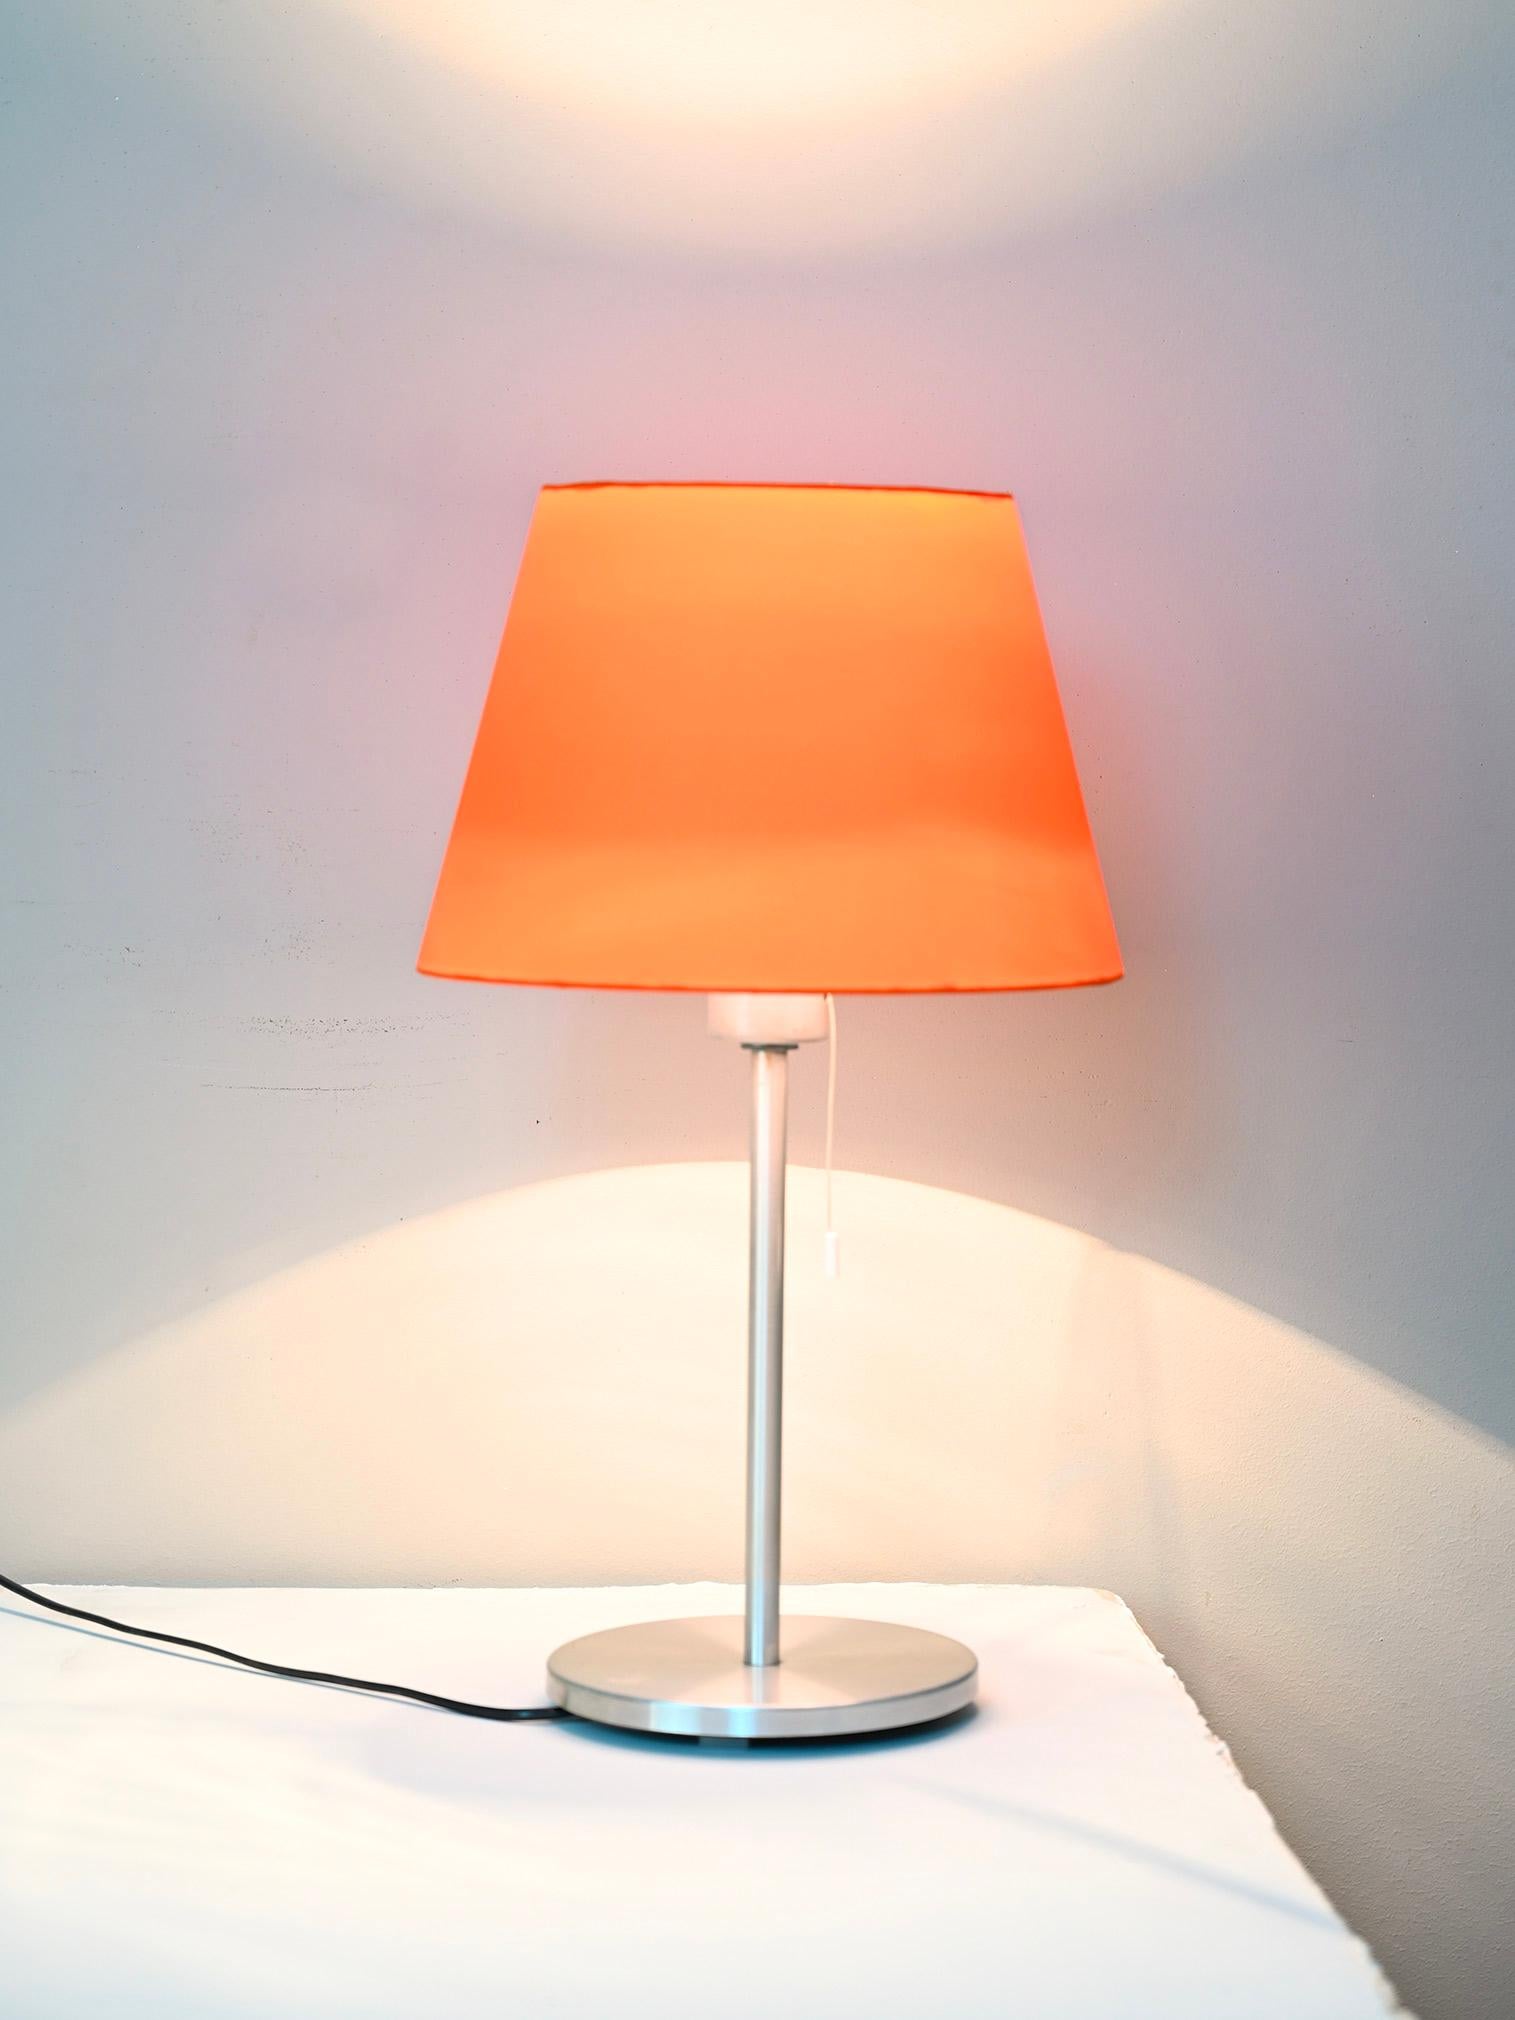 Vintage table lamp of Scandinavian manufacture from the 1970s.

The base is metallic while the lampshade is orange in color and has been remade.

Good condition, lamp works perfectly.

BD066